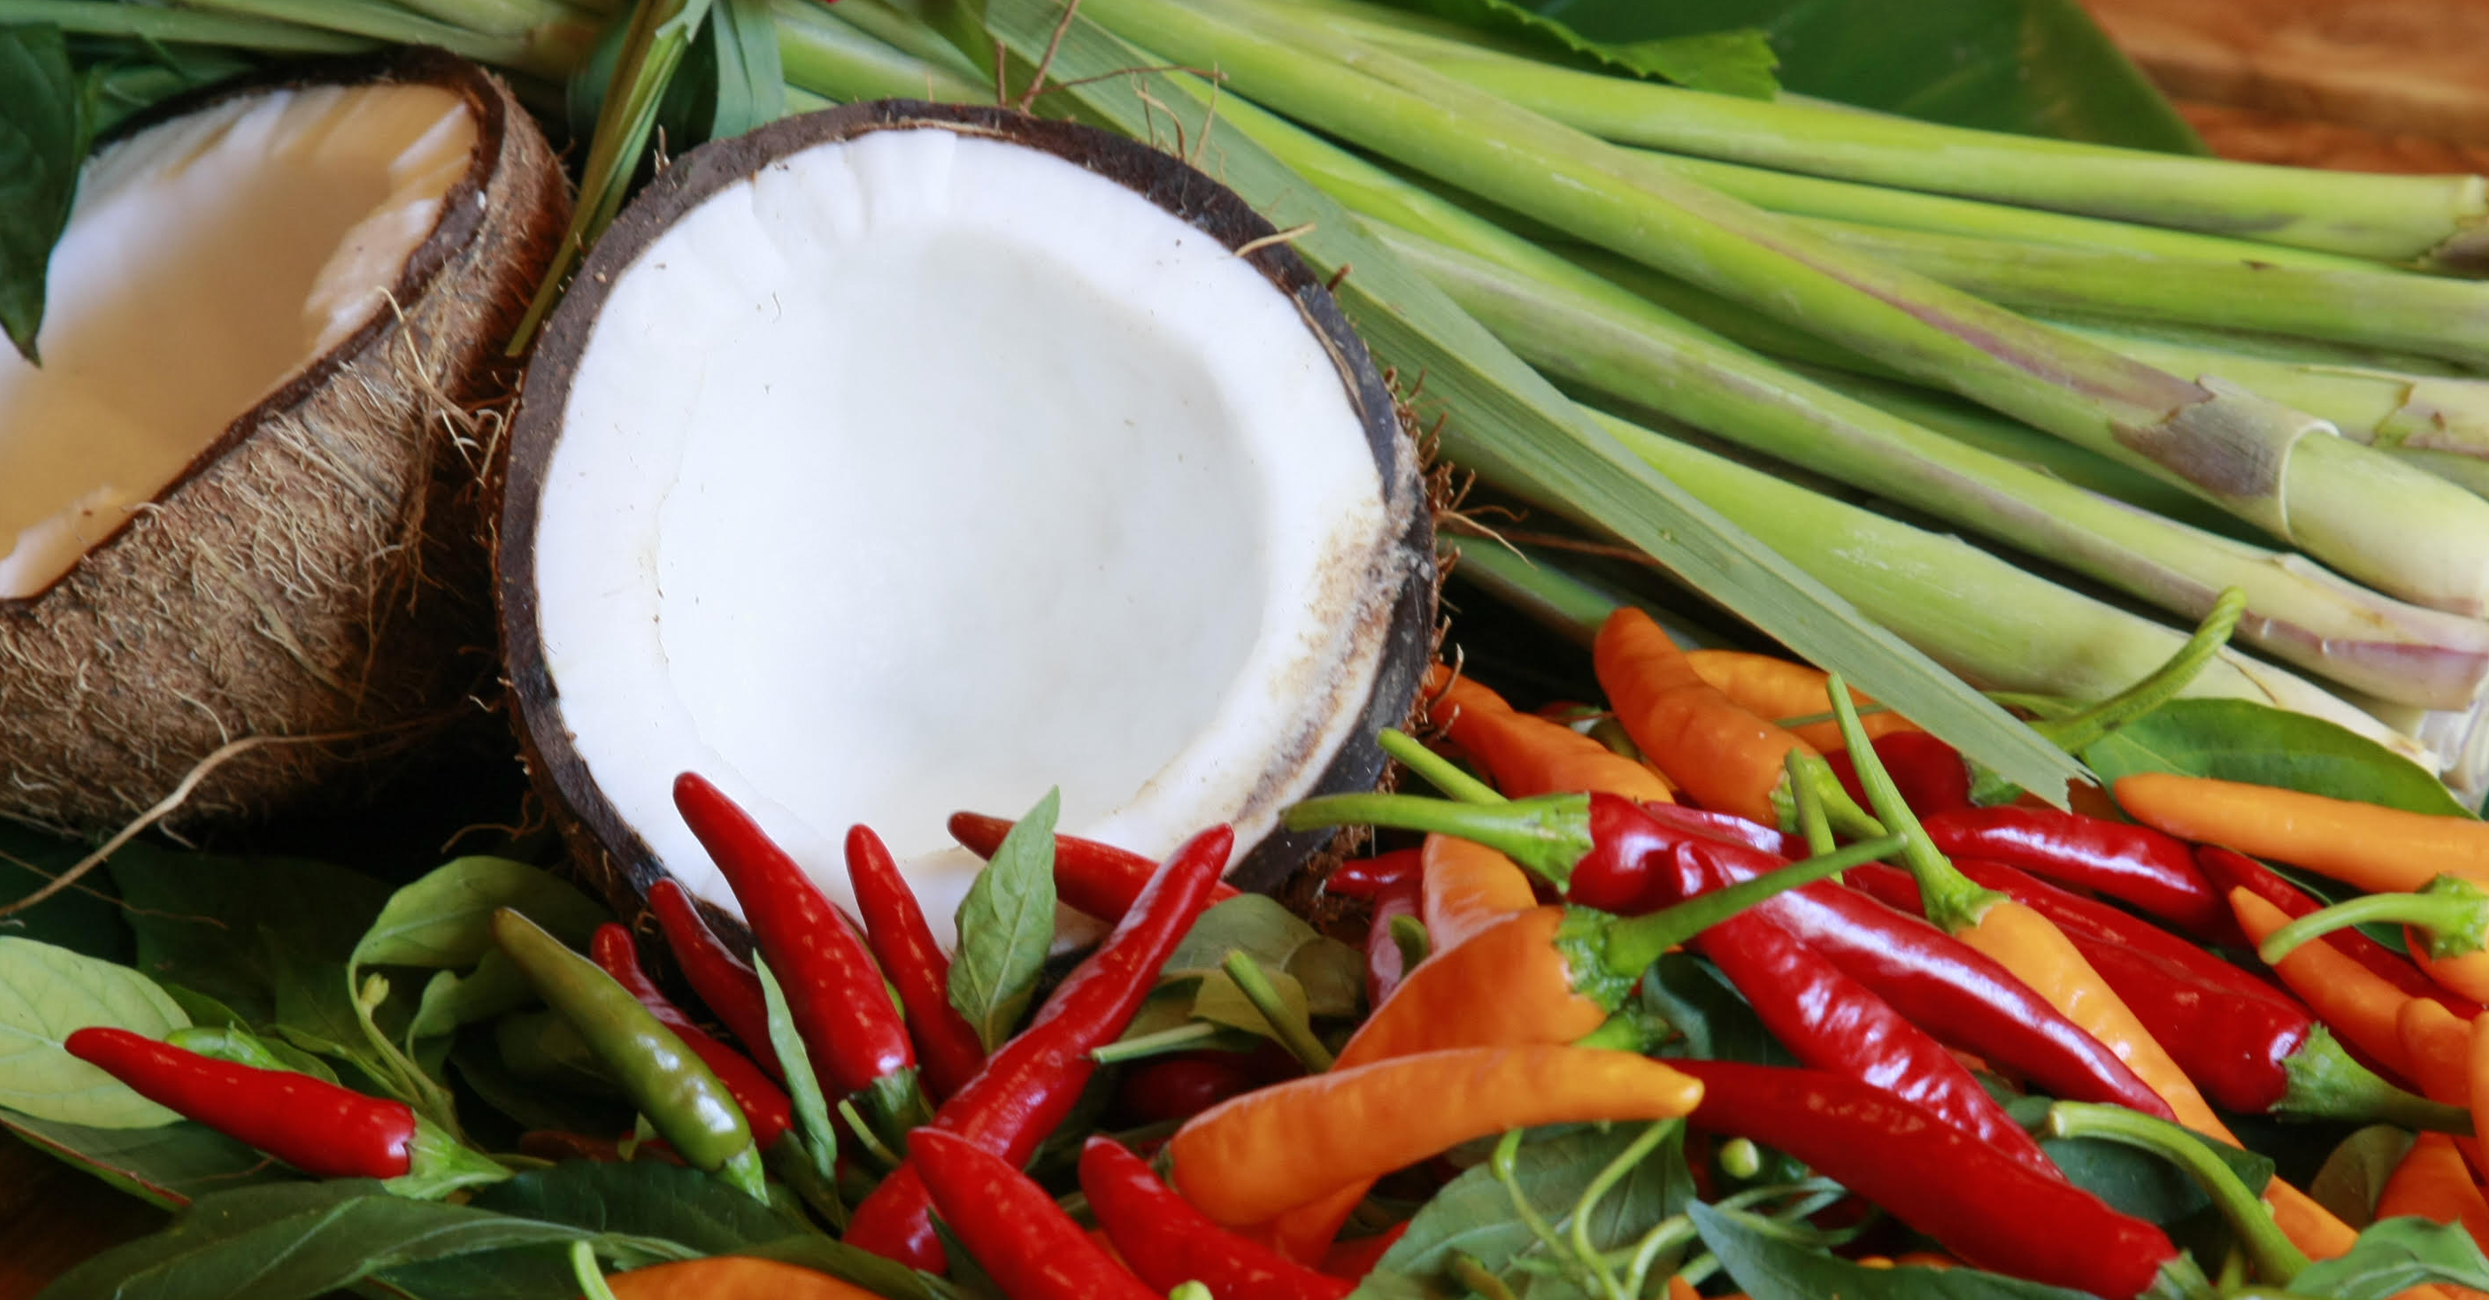 Coconut and Thai chilli peppers